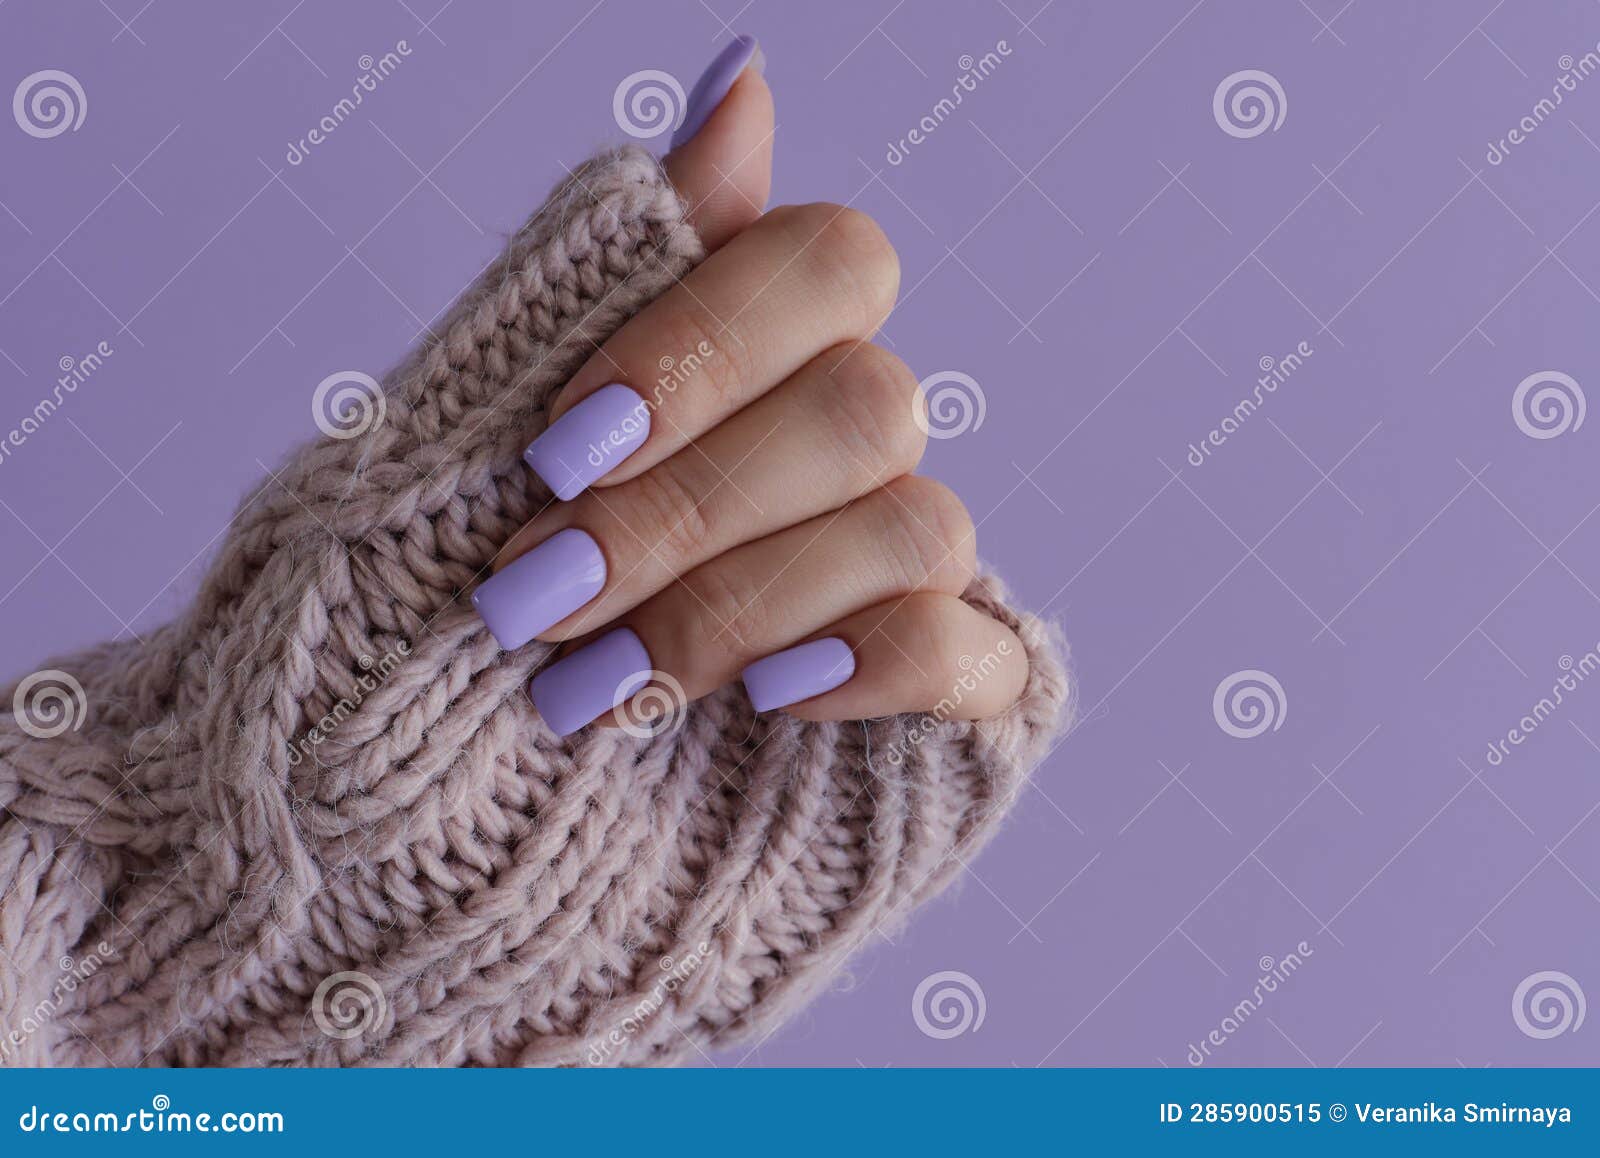 female's hand with delicate nails of trendy lavender color